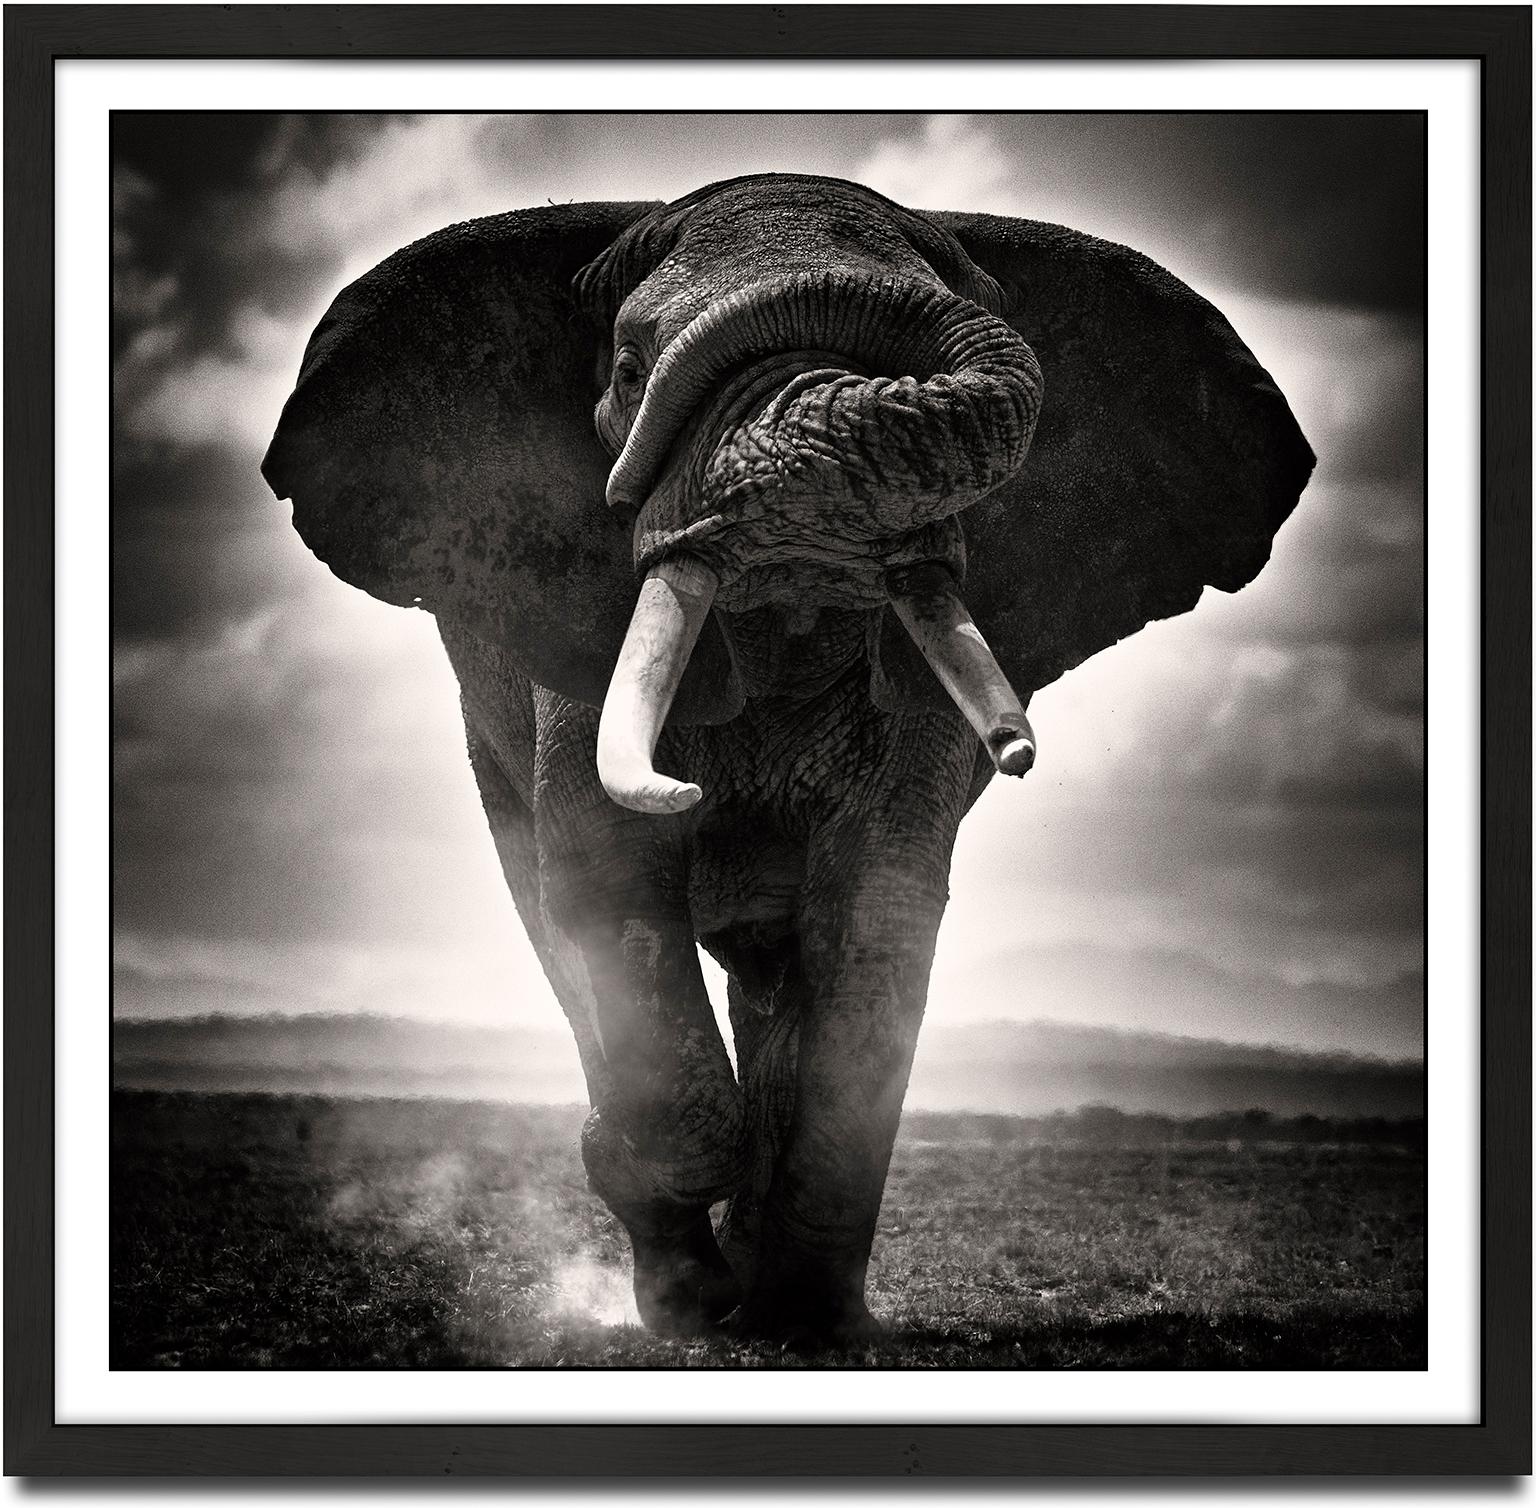 POWER I, Africa, Elephant, animal, wildlife, black and white photography - Photograph by Joachim Schmeisser